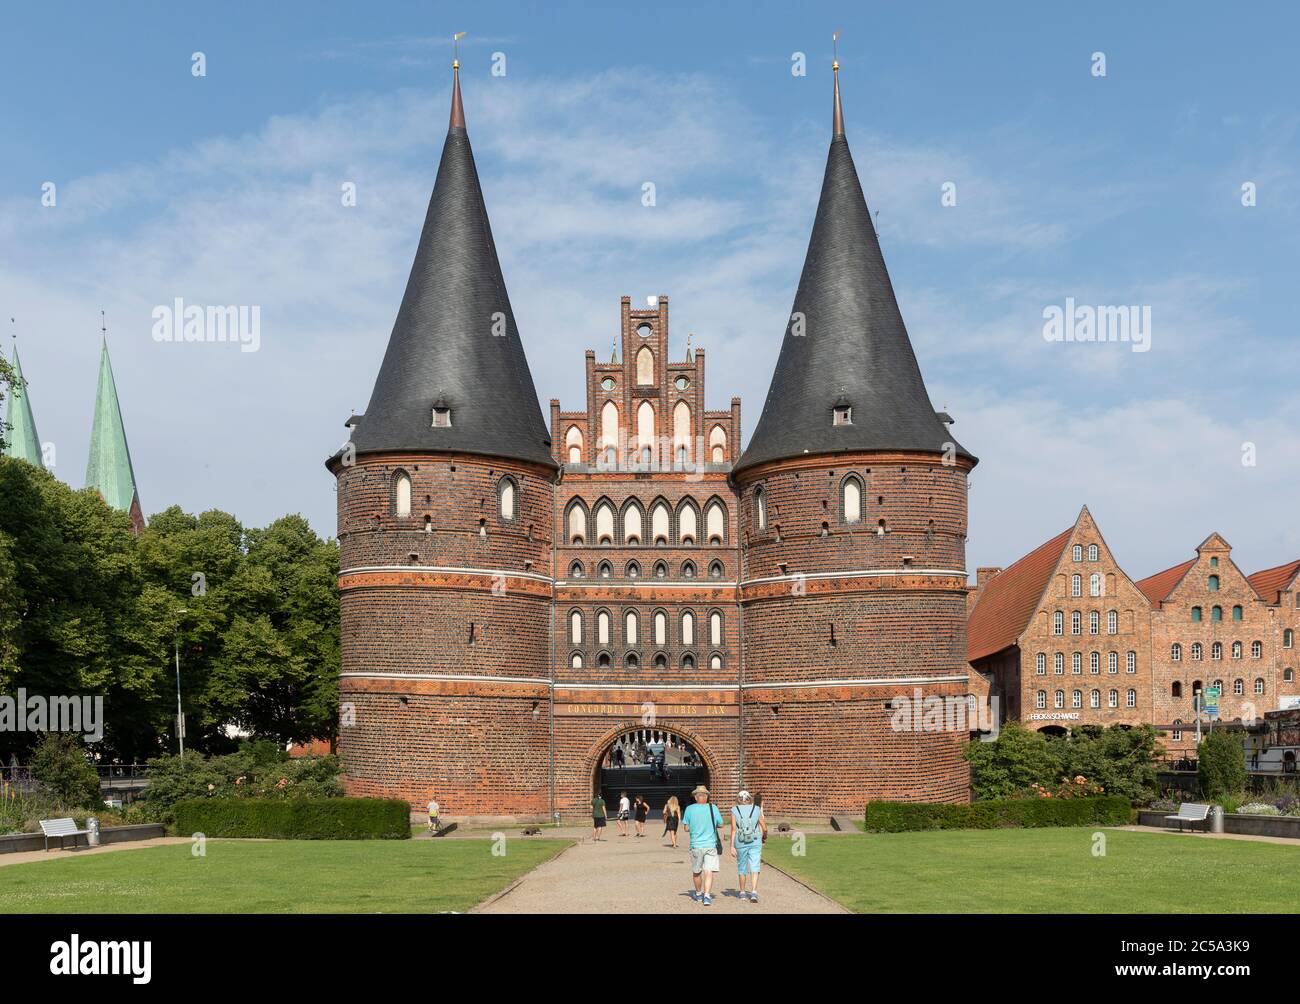 The Holstentor ('Holstein Gate') is a city gate that borders the old town of the Hanseatic city of Luebeck to the west. It is the symbol of the city. Stock Photo